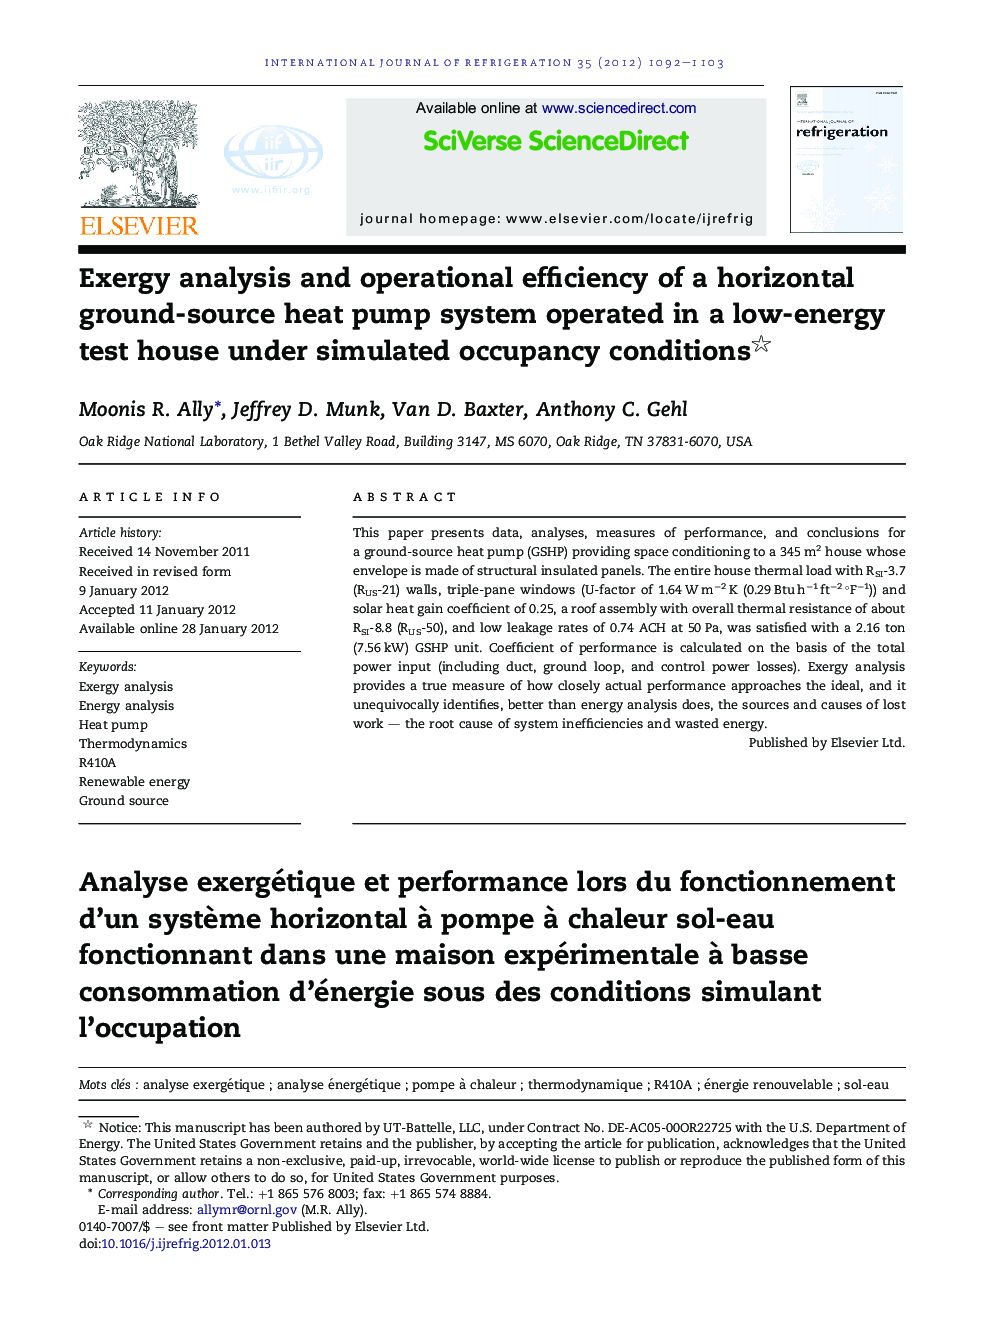 Exergy analysis and operational efficiency of a horizontal ground-source heat pump system operated in a low-energy test house under simulated occupancy conditions 